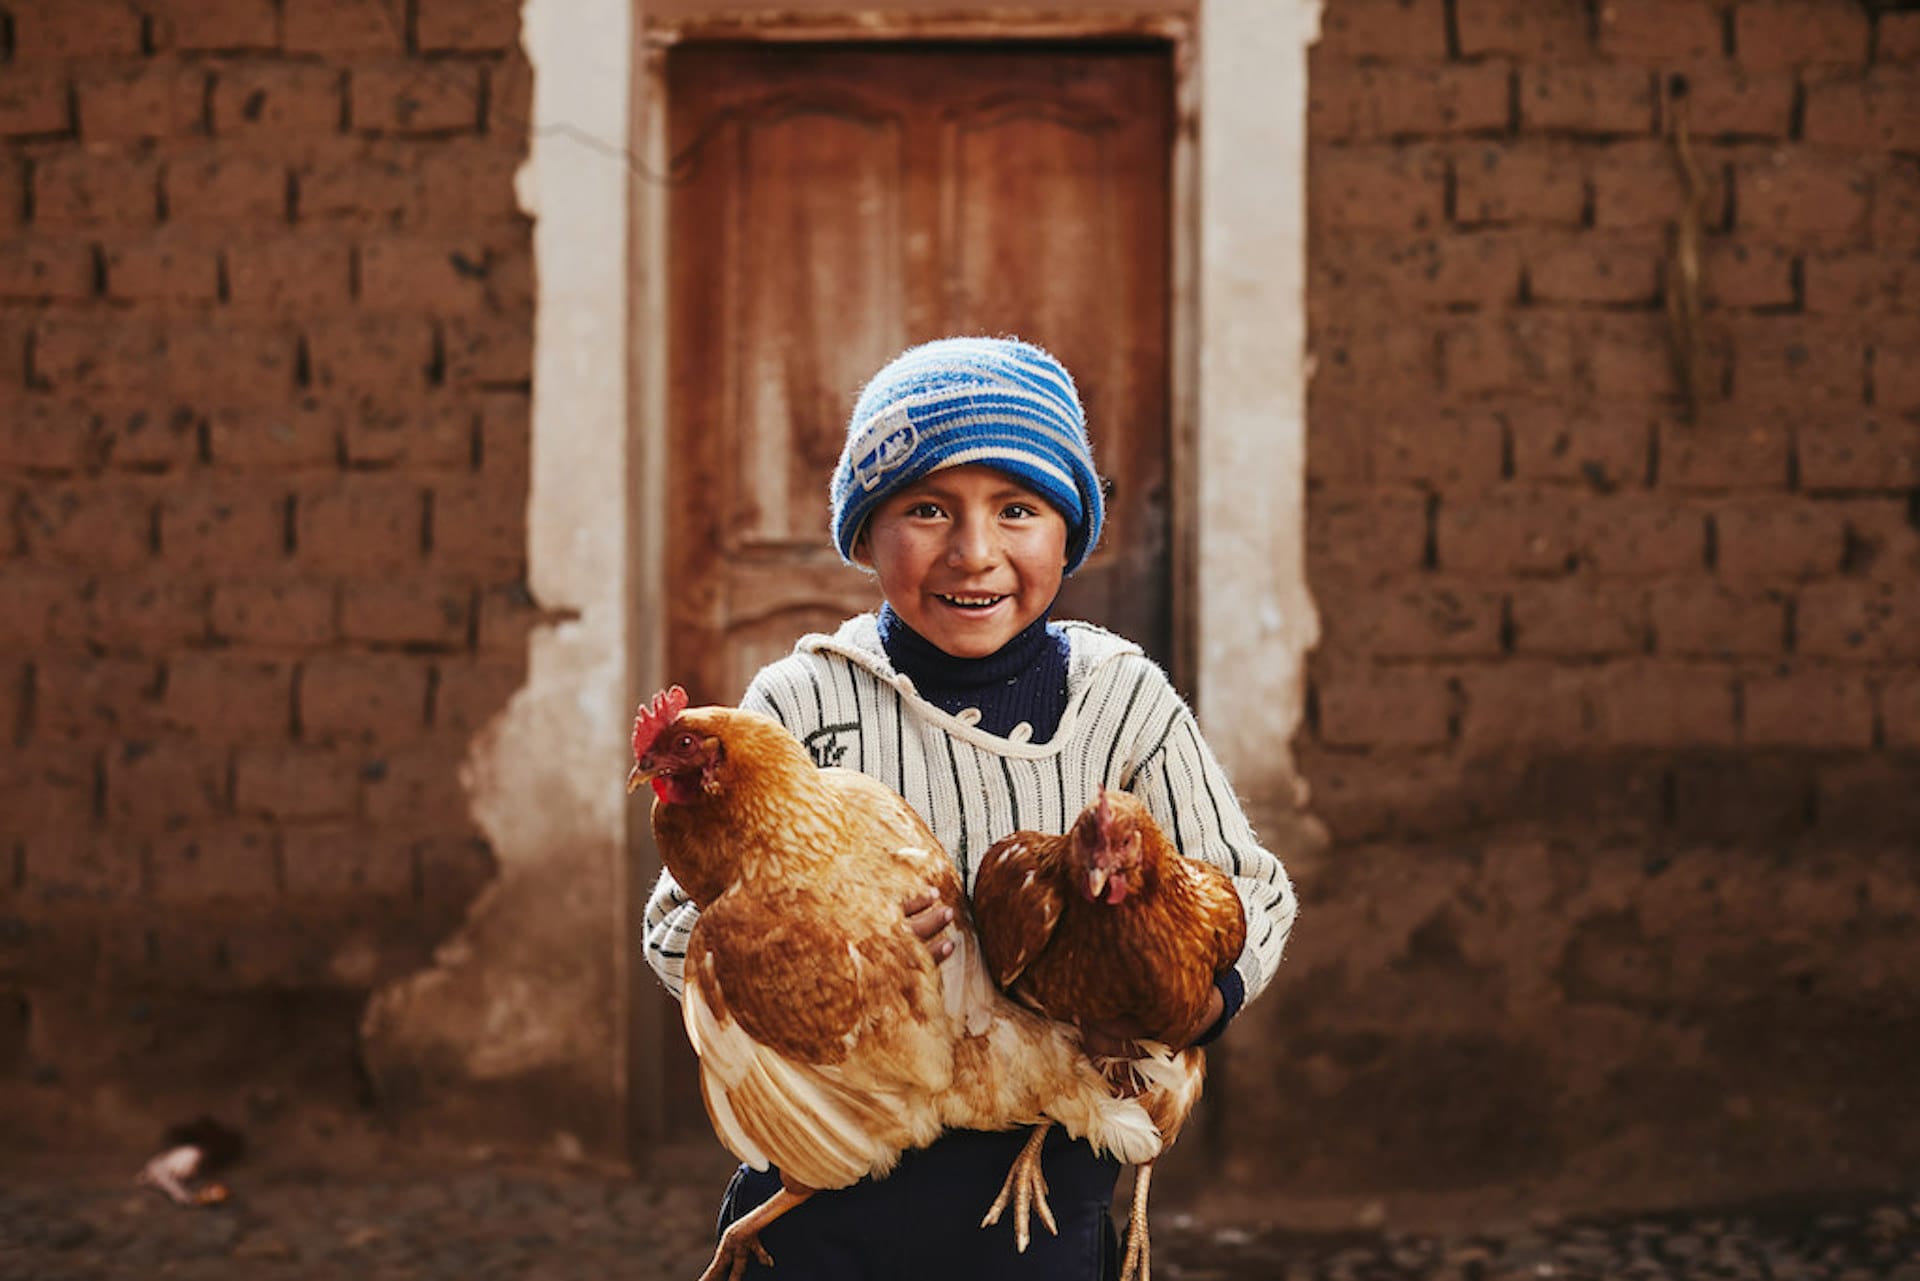 A boy in a striped shirt and blue beanie holding two chickens in his arms.